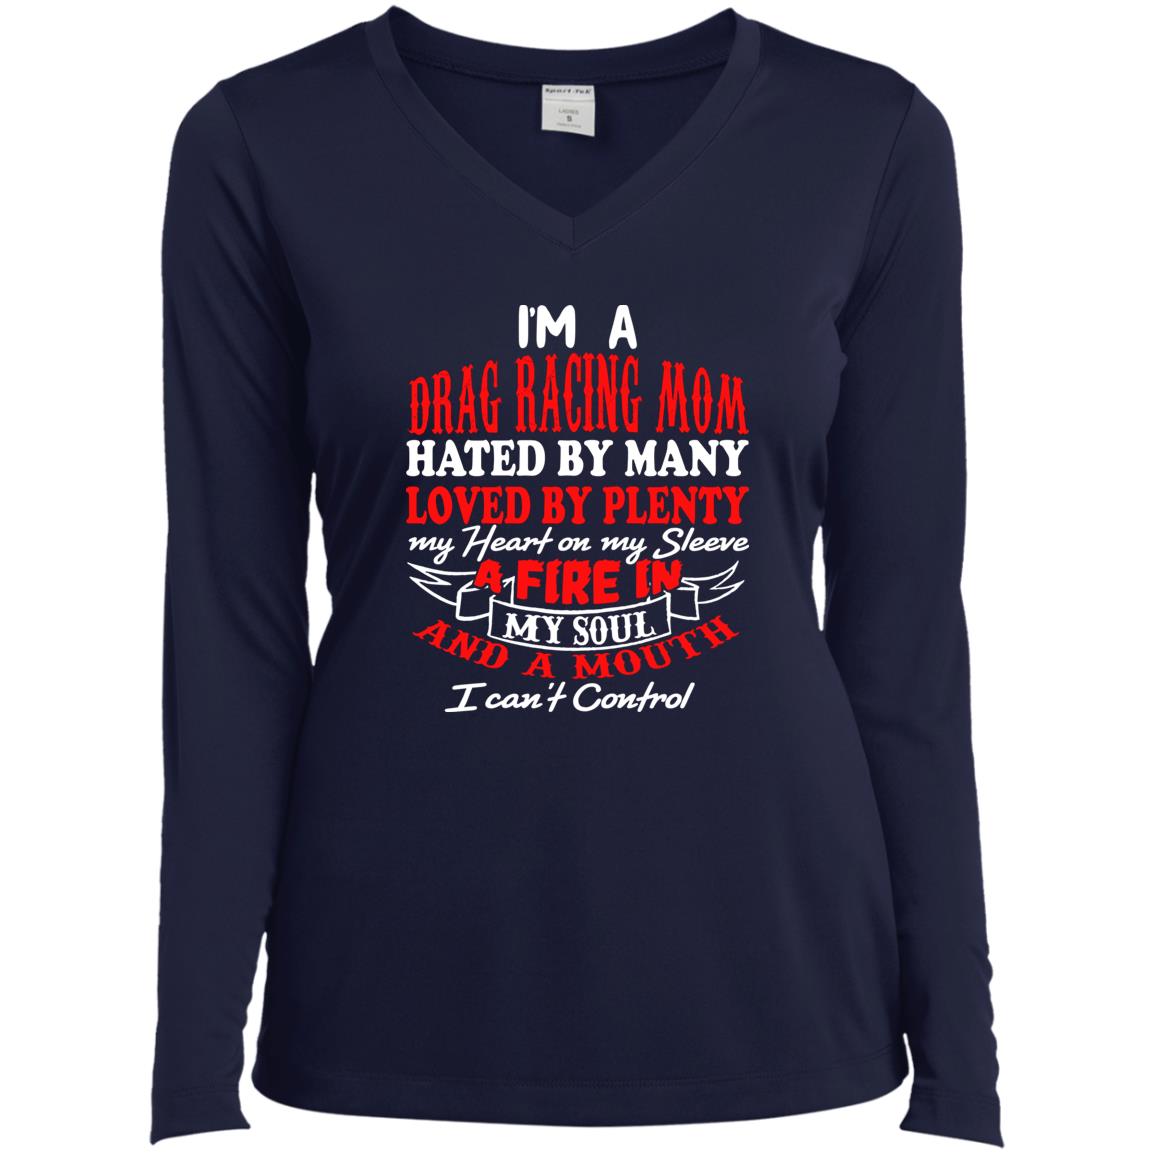 I'm A Drag Racing Mom Hated By Many Loved By Plenty Ladies’ Long Sleeve Performance V-Neck Tee